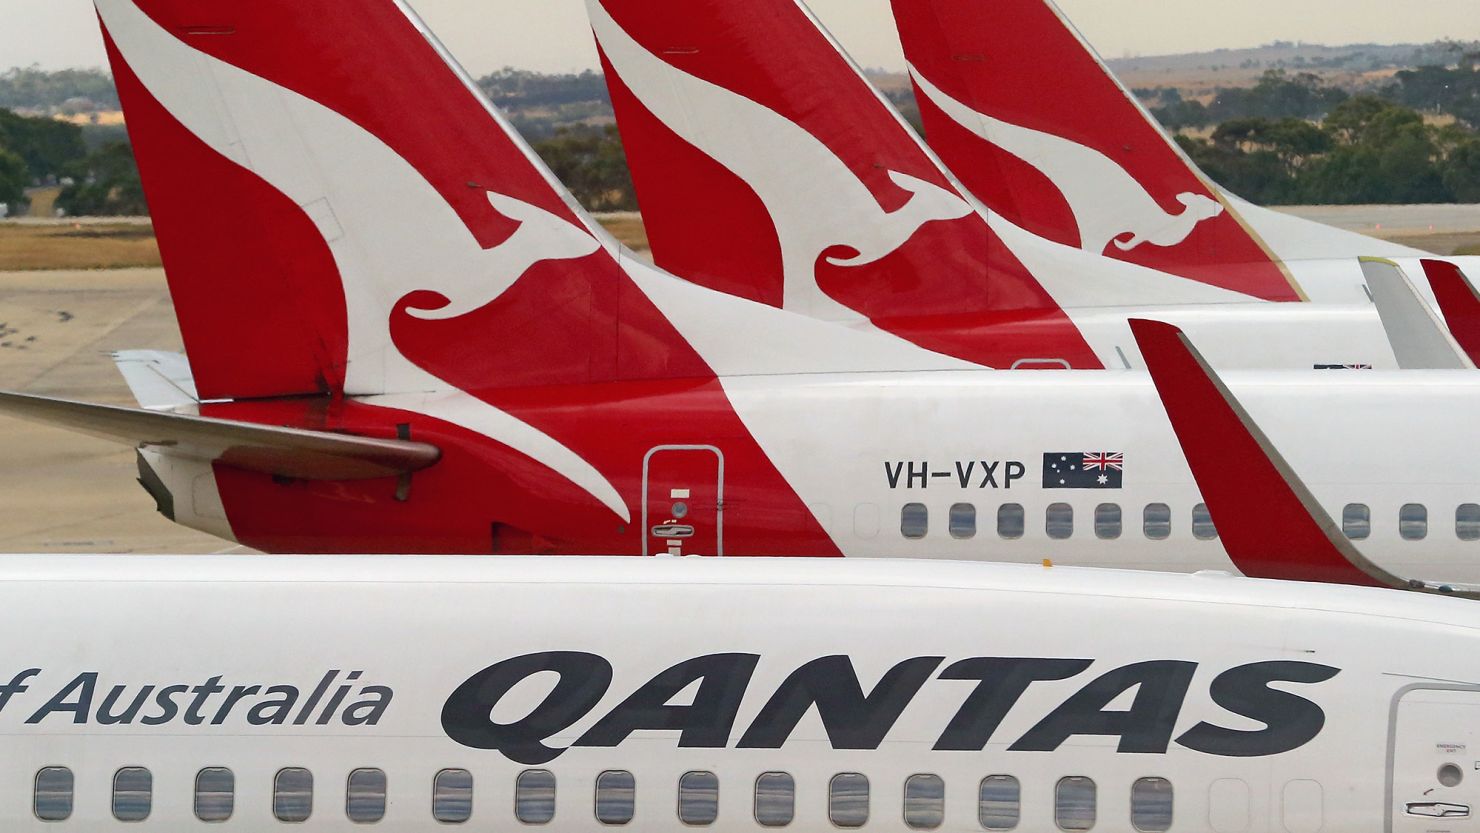 Qantas was operating the flight from Newman to Perth on Friday.